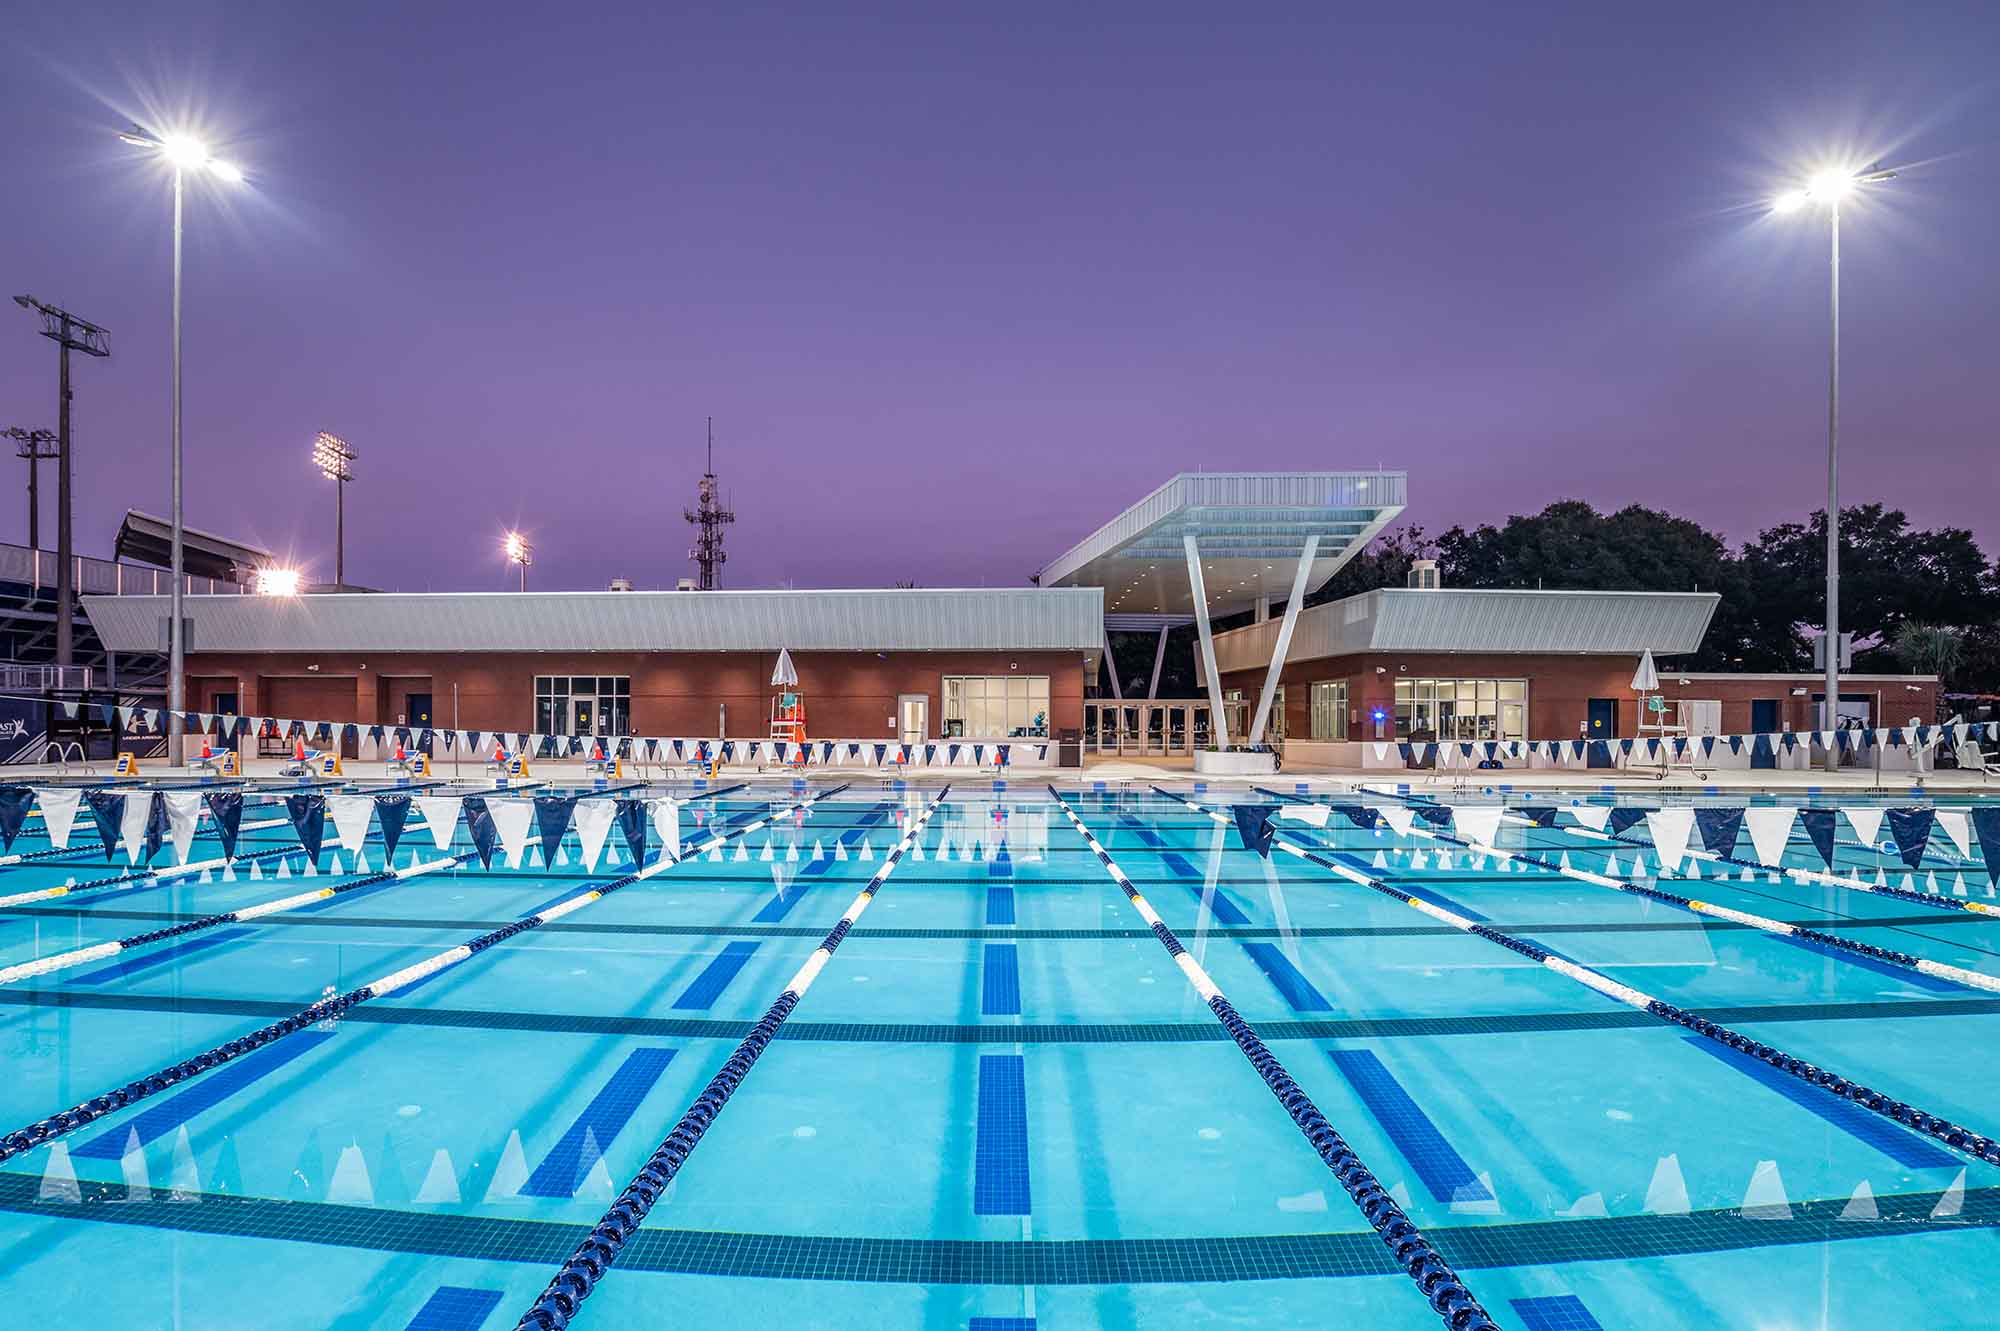 8-foot deep competition pool at Aerial view of University of North Florida Aquatic Complex